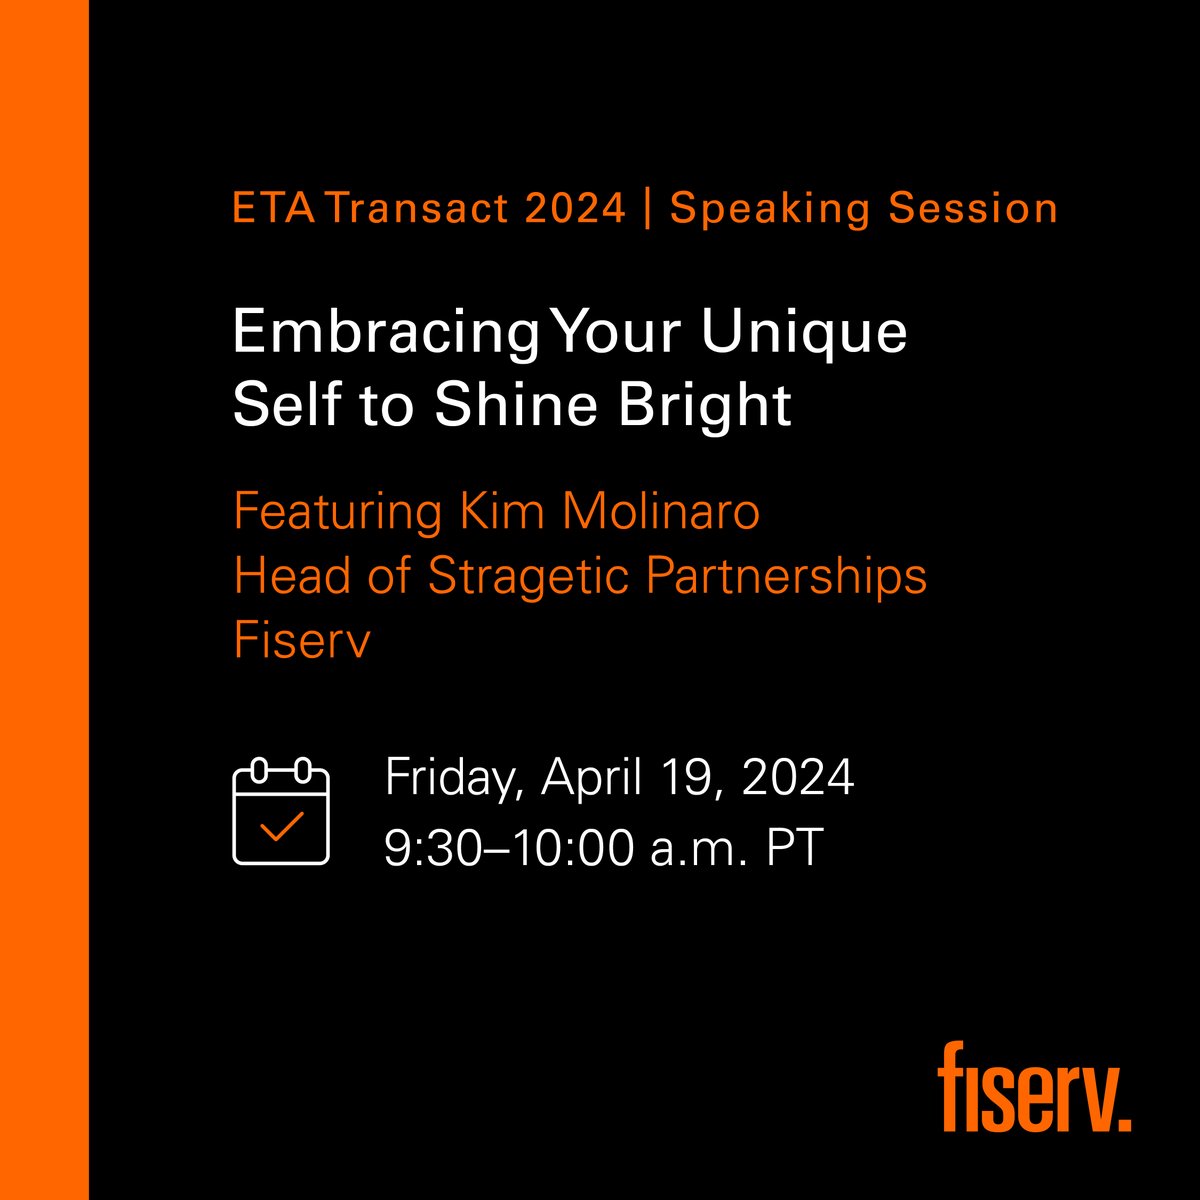 We're excited to meet you at #ETATransact! Check out the Fiserv speaking sessions and visit booth 721 for some friendly competition.